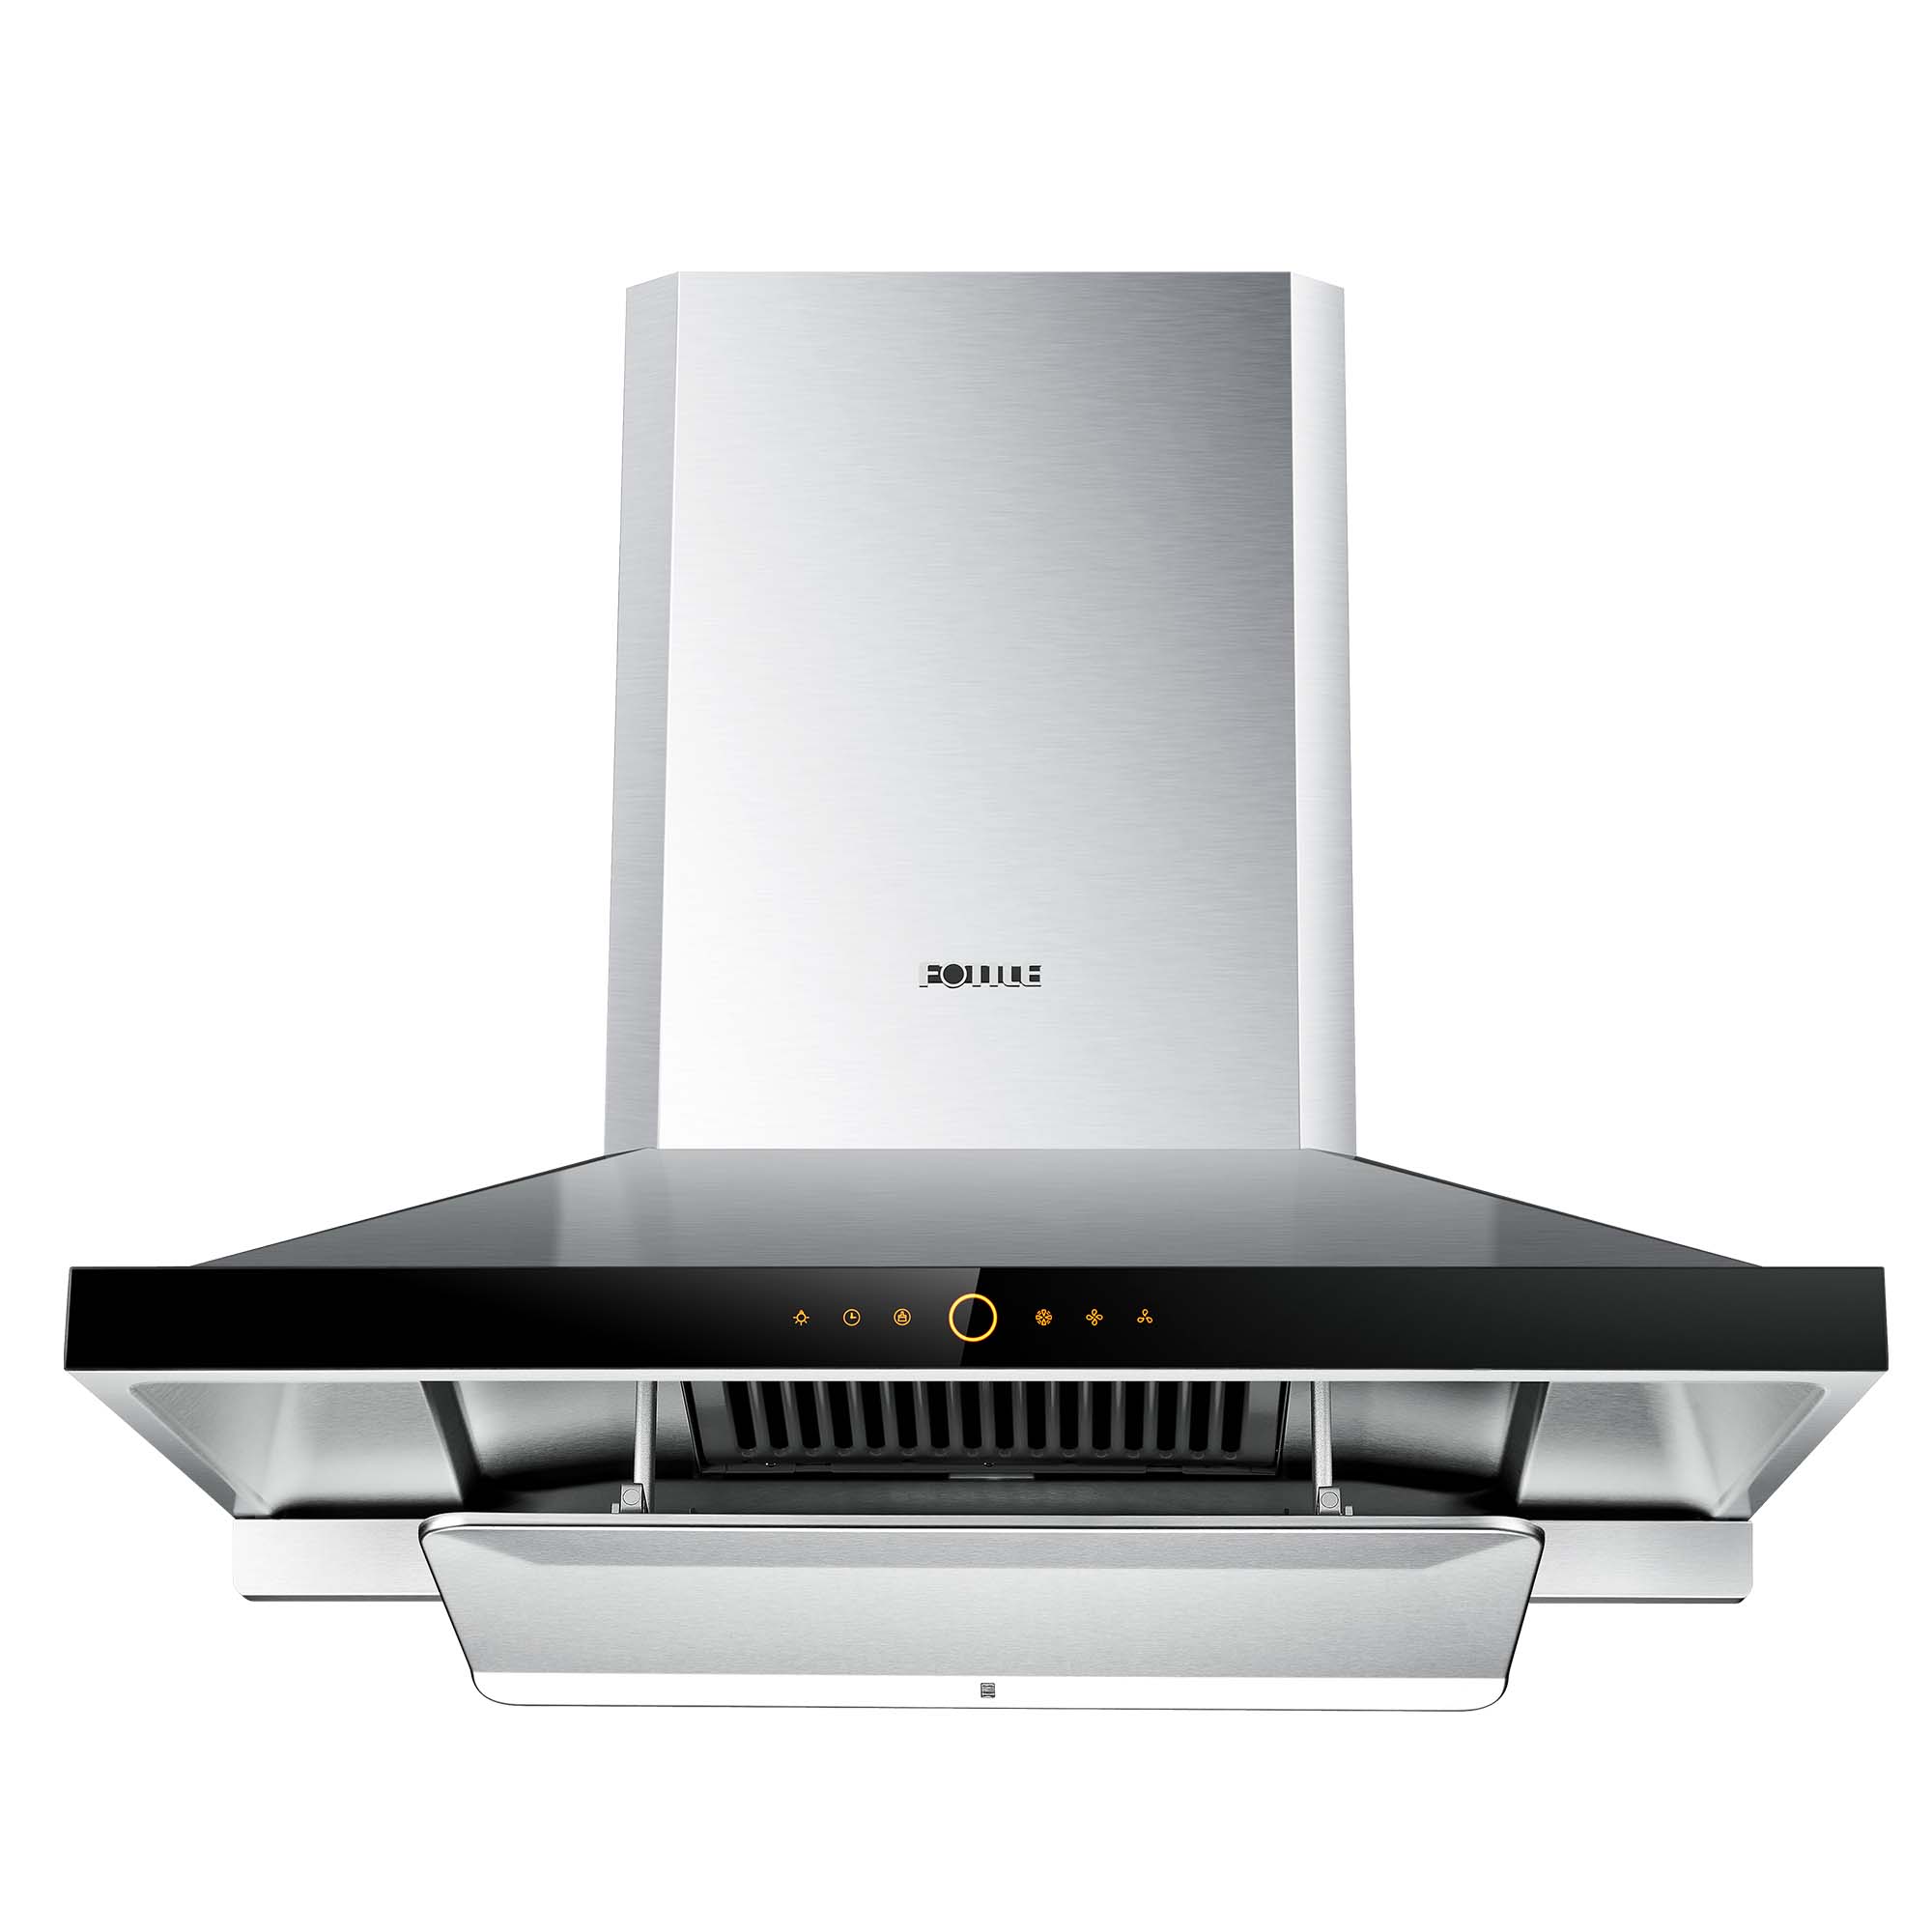 Fotile Perimeter Vent Series 36 in. 1000 CFM Wall Mount Range Hood with Touchscreen in Stainless Steel (EMS9026)